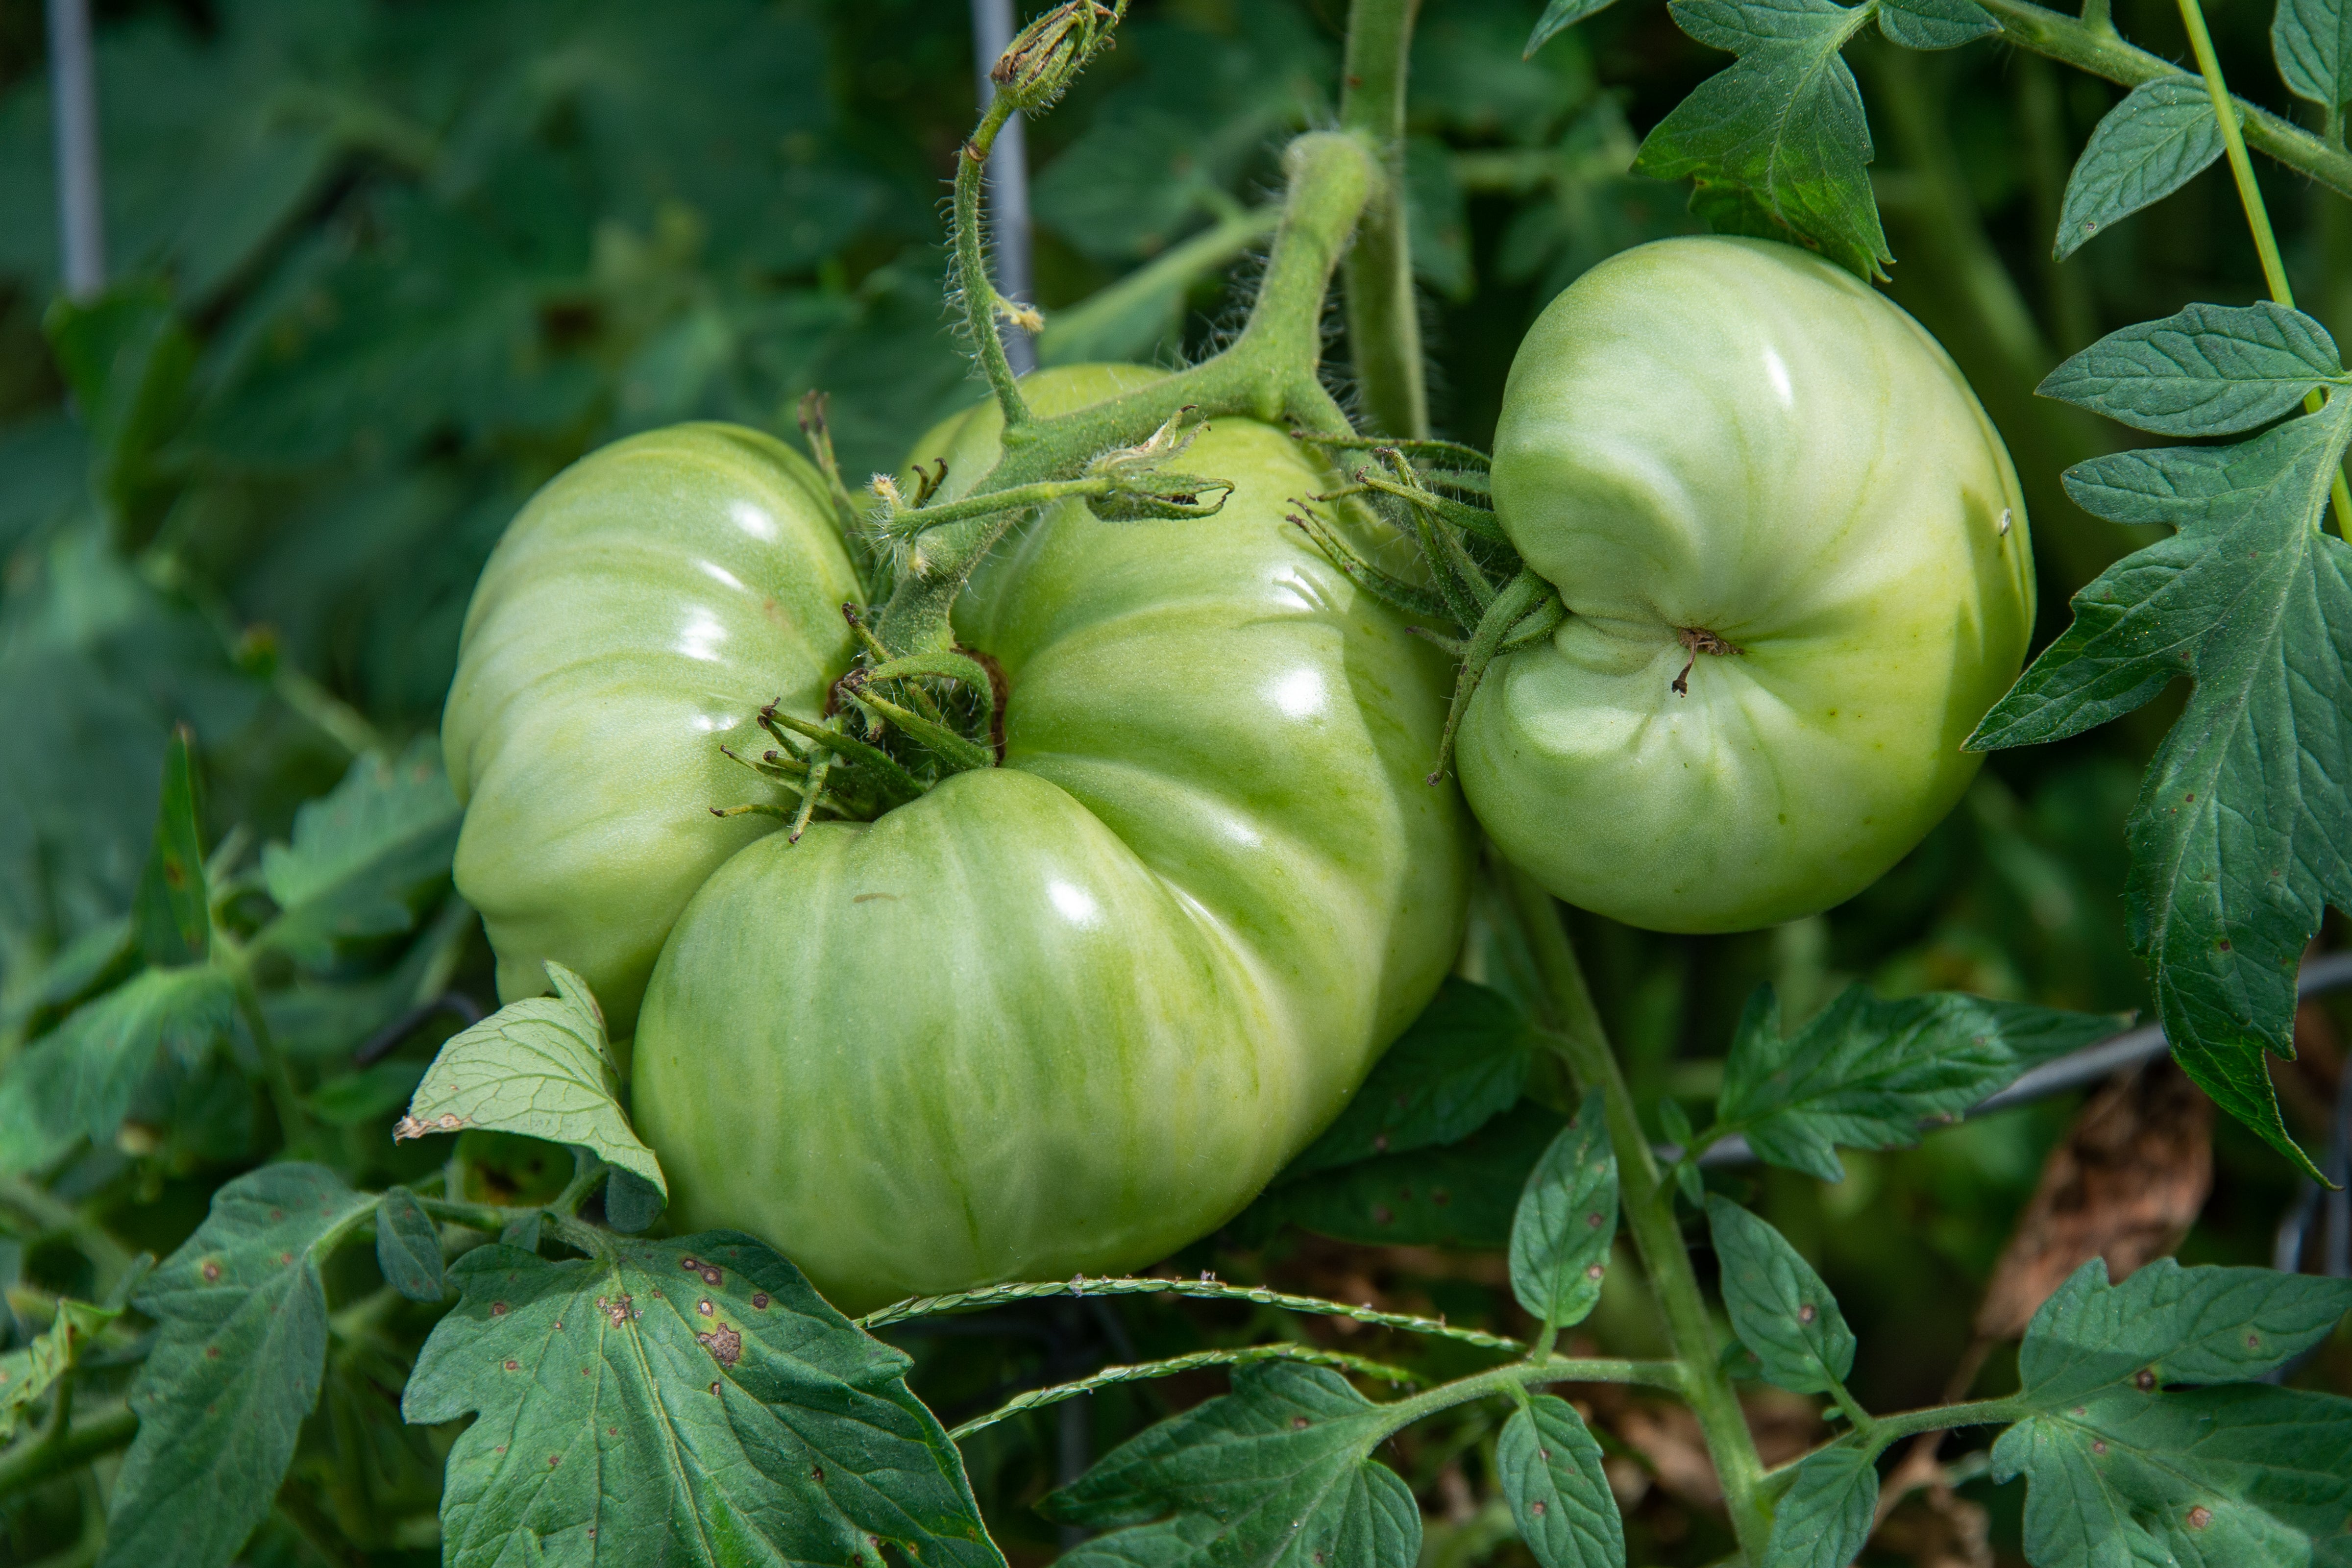 Green tomatoes showing signs of catfacing